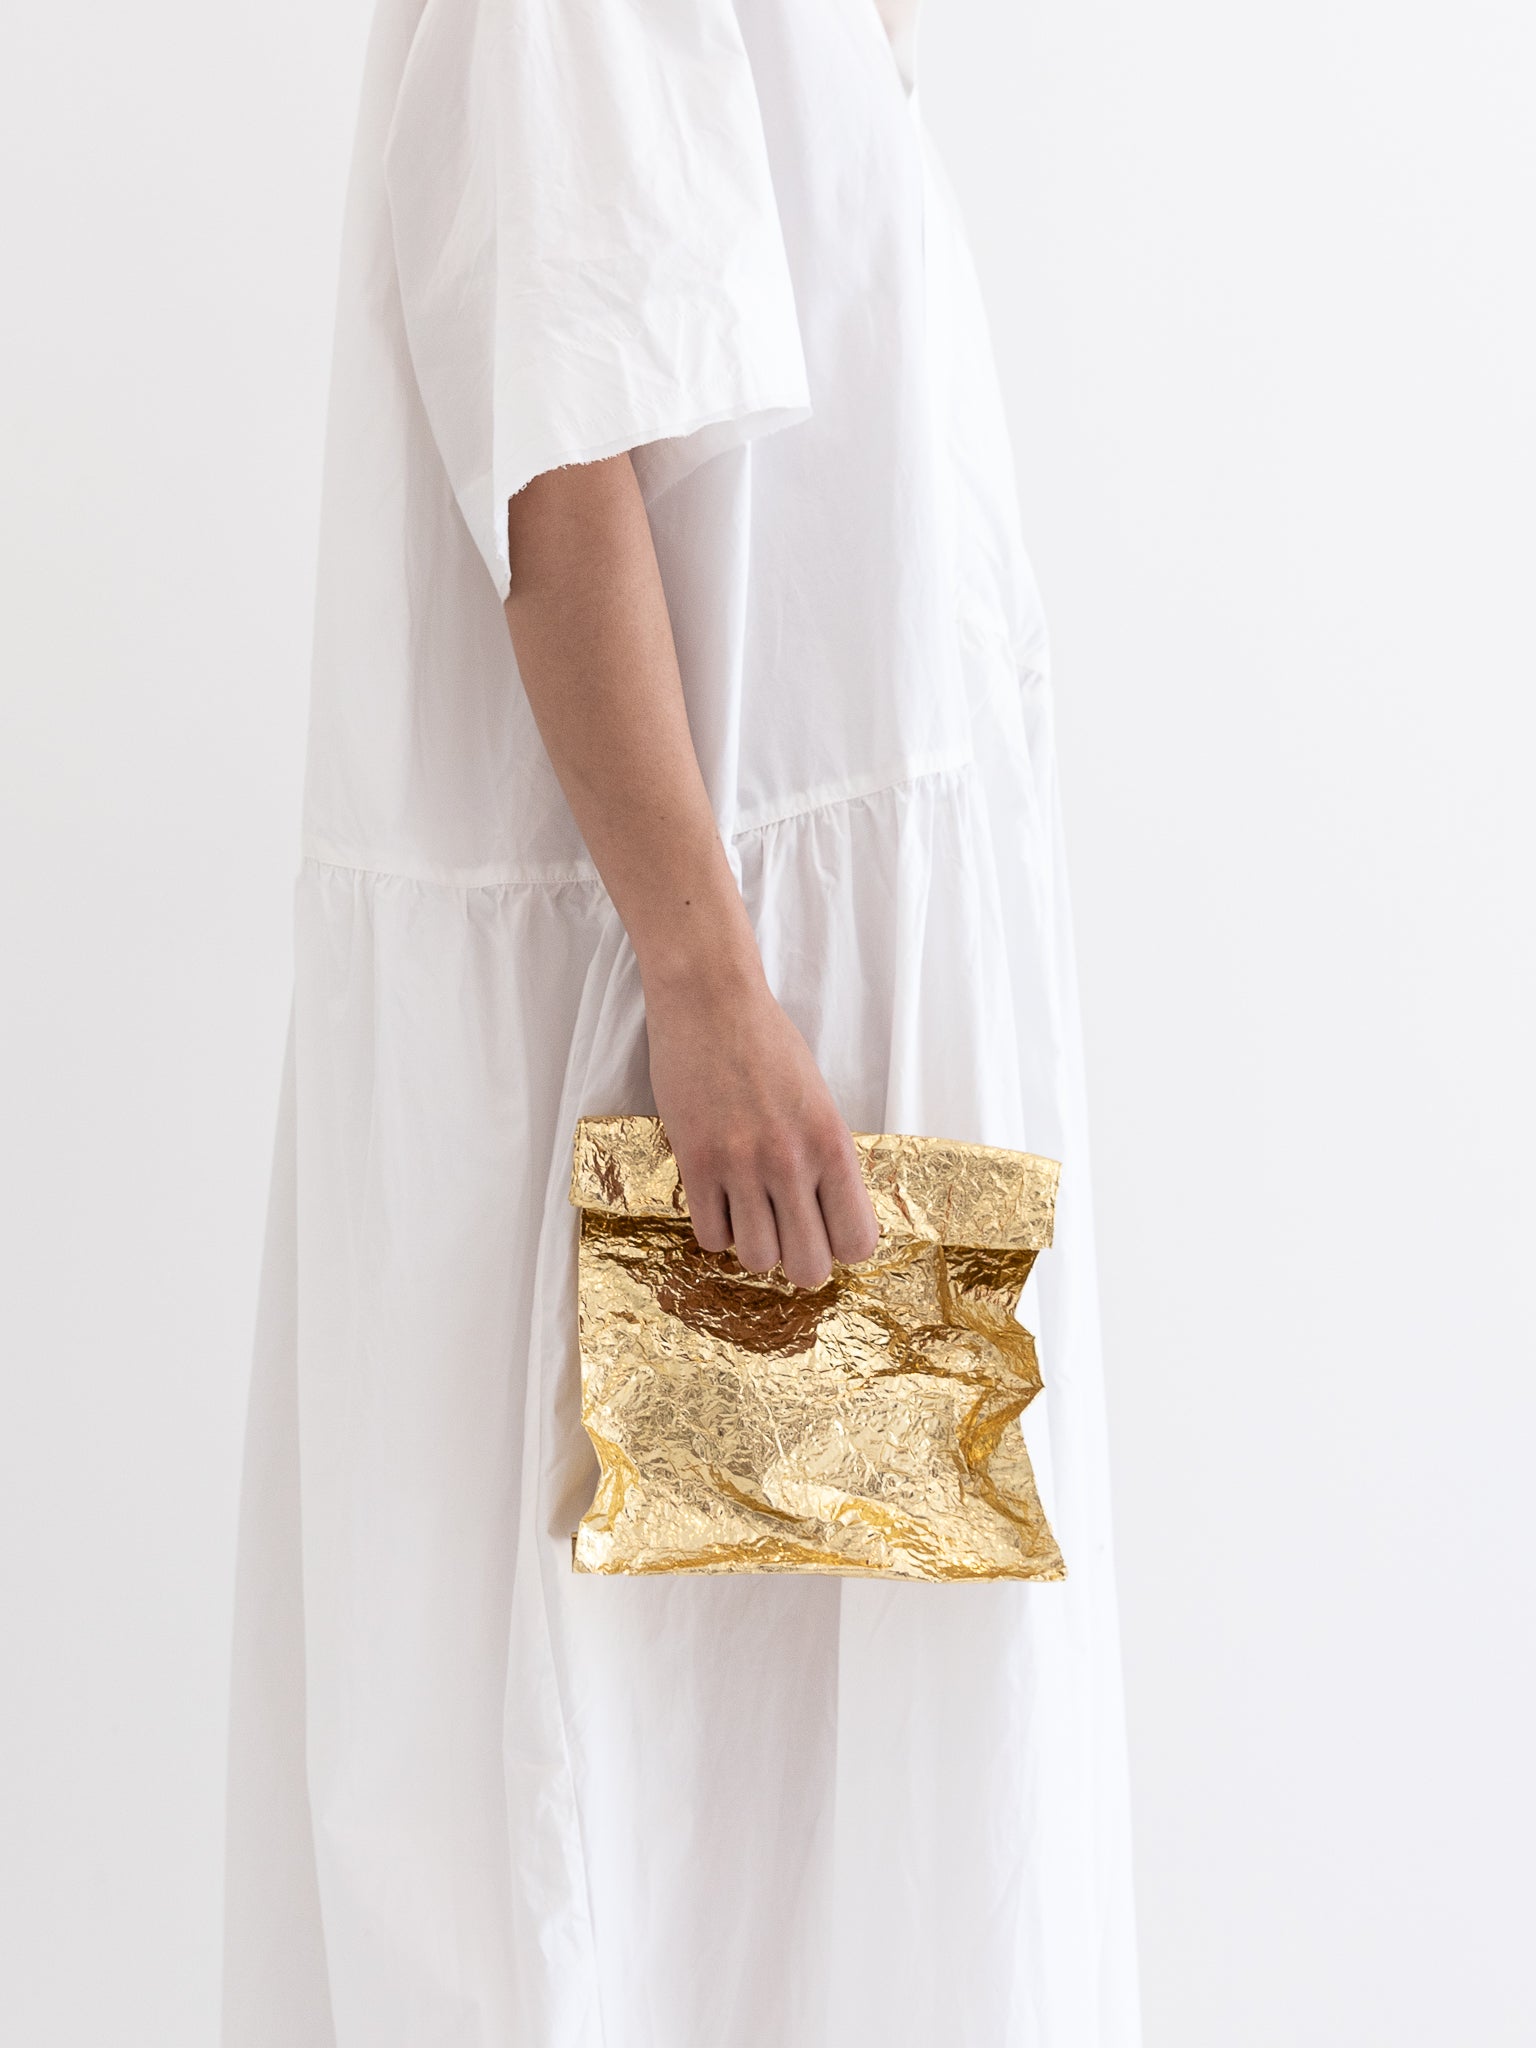 Zilla Lunch Bag, Gold - Worthwhile, Inc.